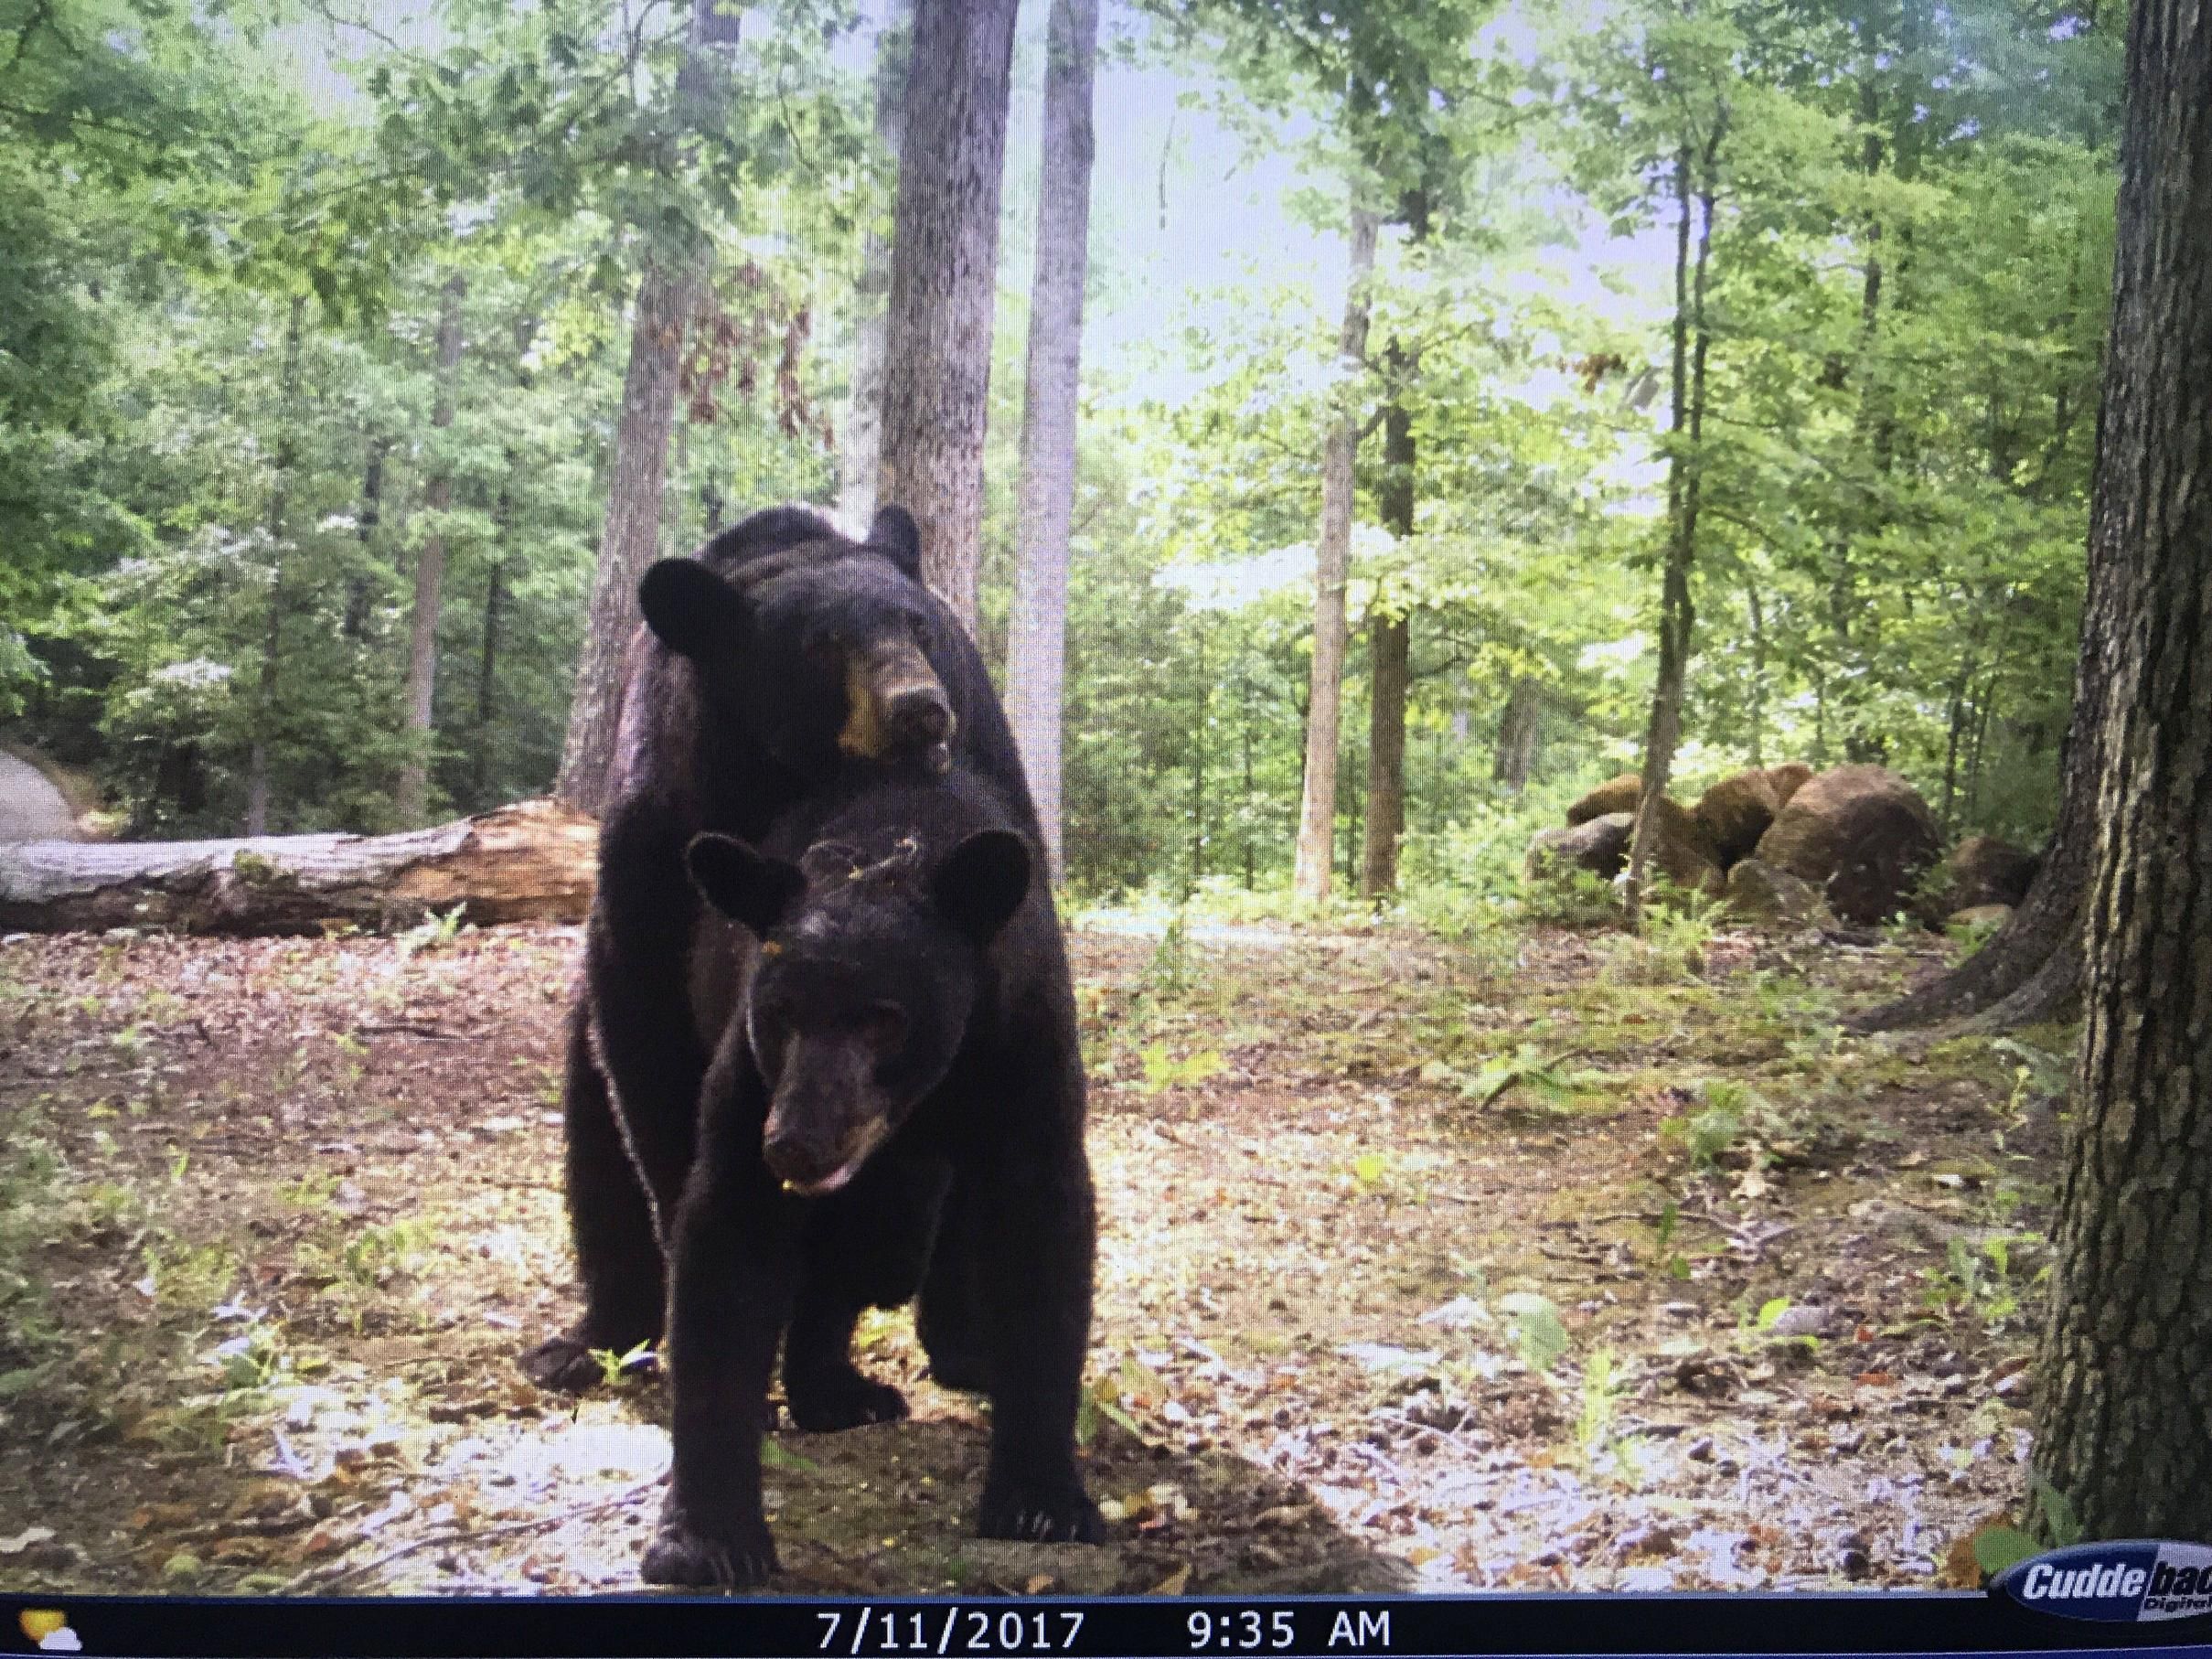 Checked the game cam with my 4 year old